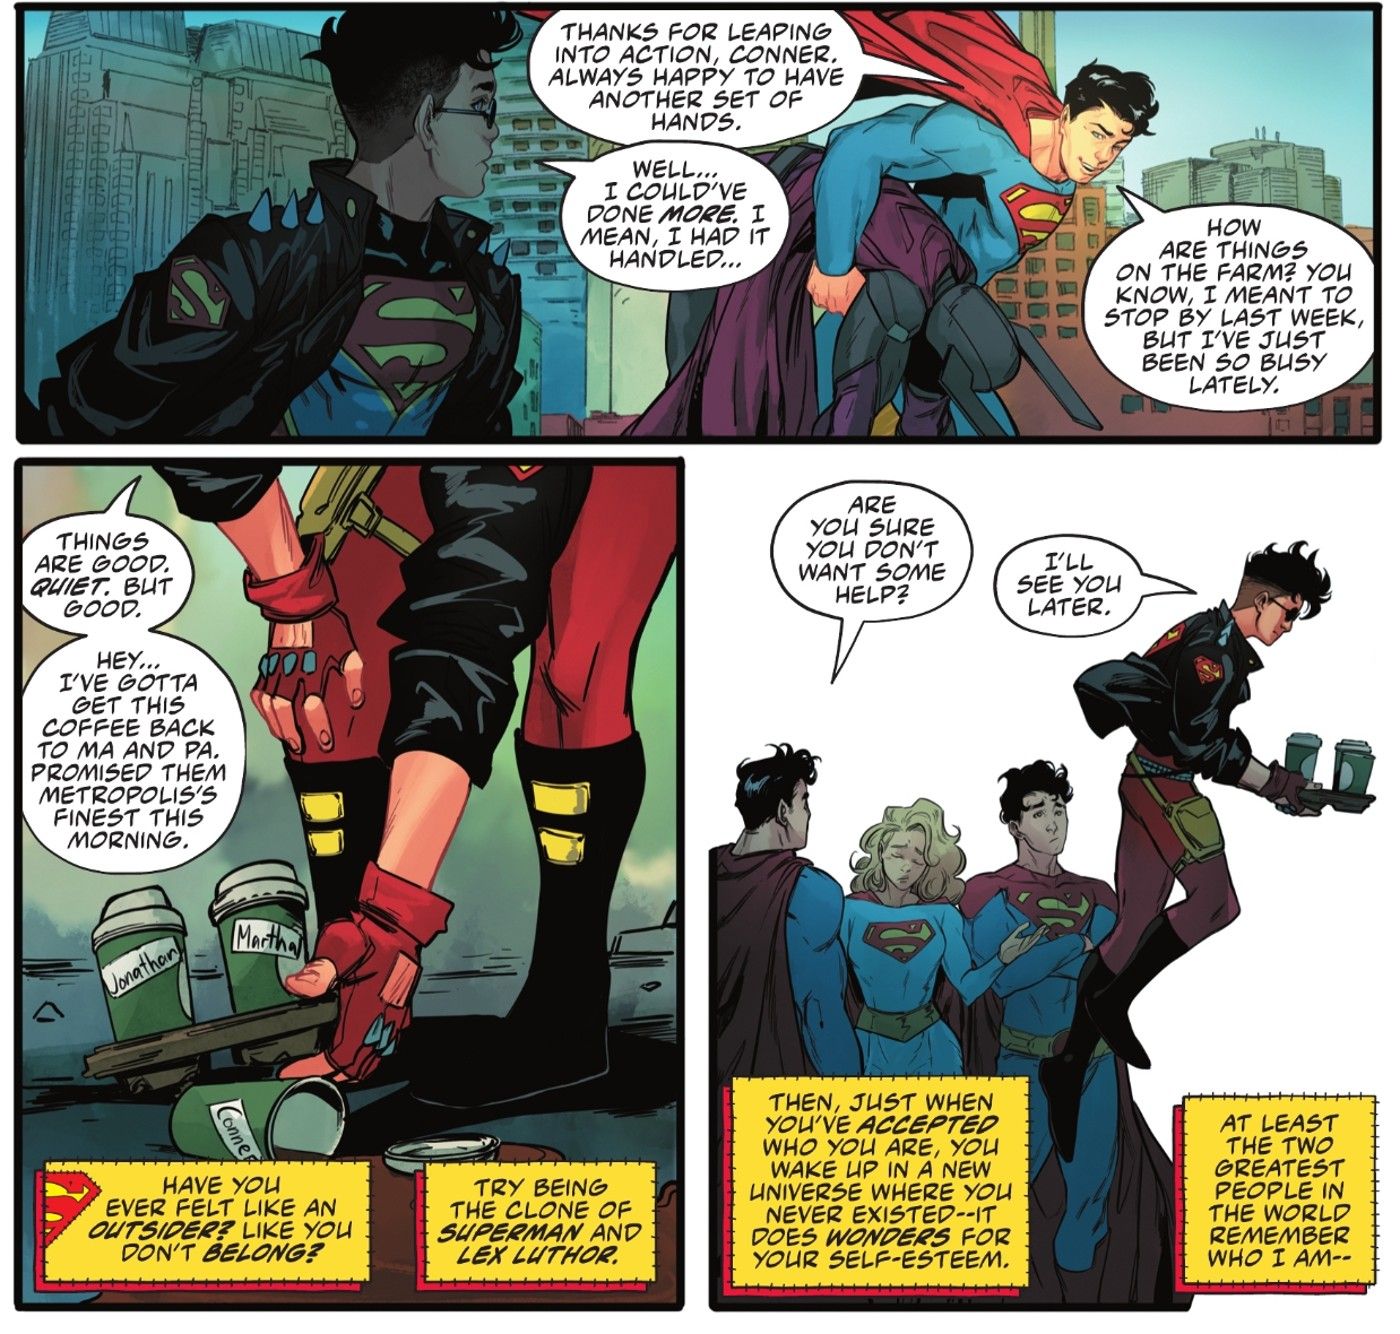 Superboy Admits He Respects 2 People More Than Superman